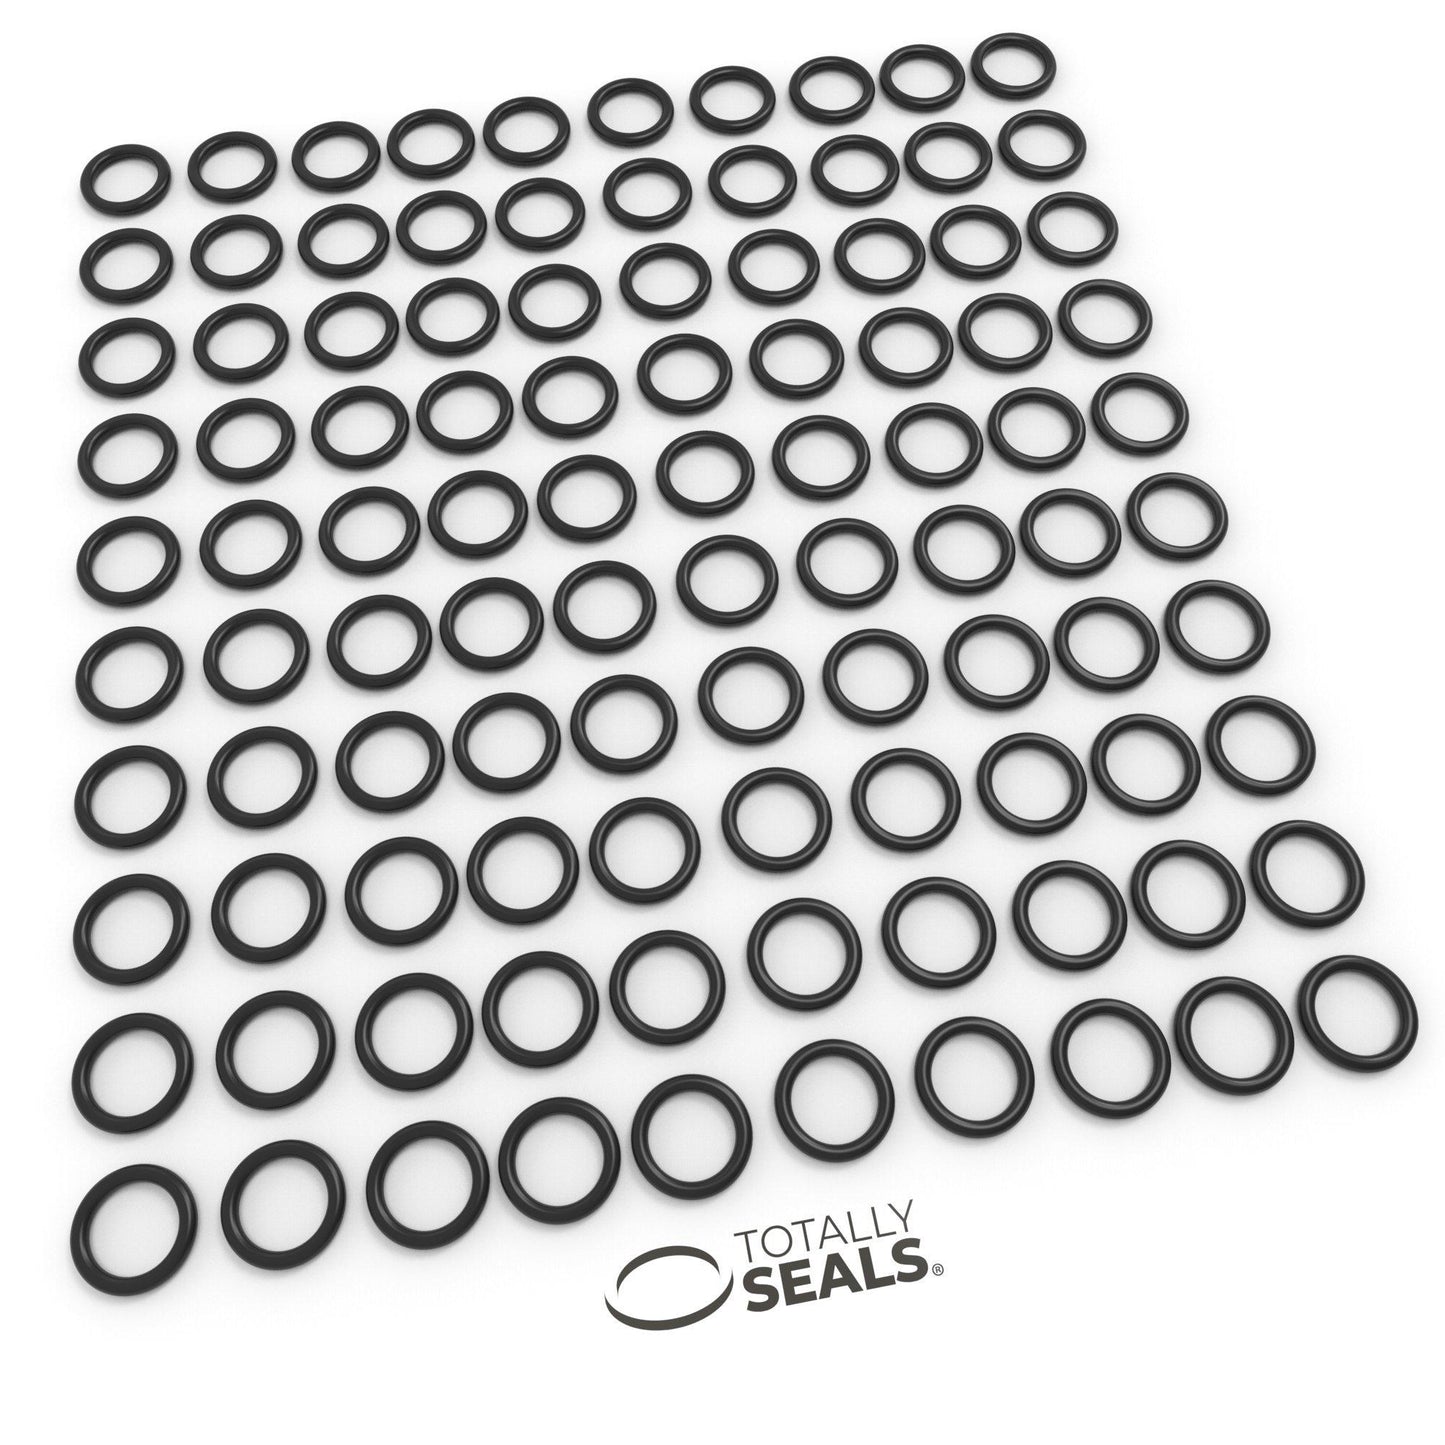 15mm x 1mm (17mm OD) Nitrile O-Rings - Totally Seals®